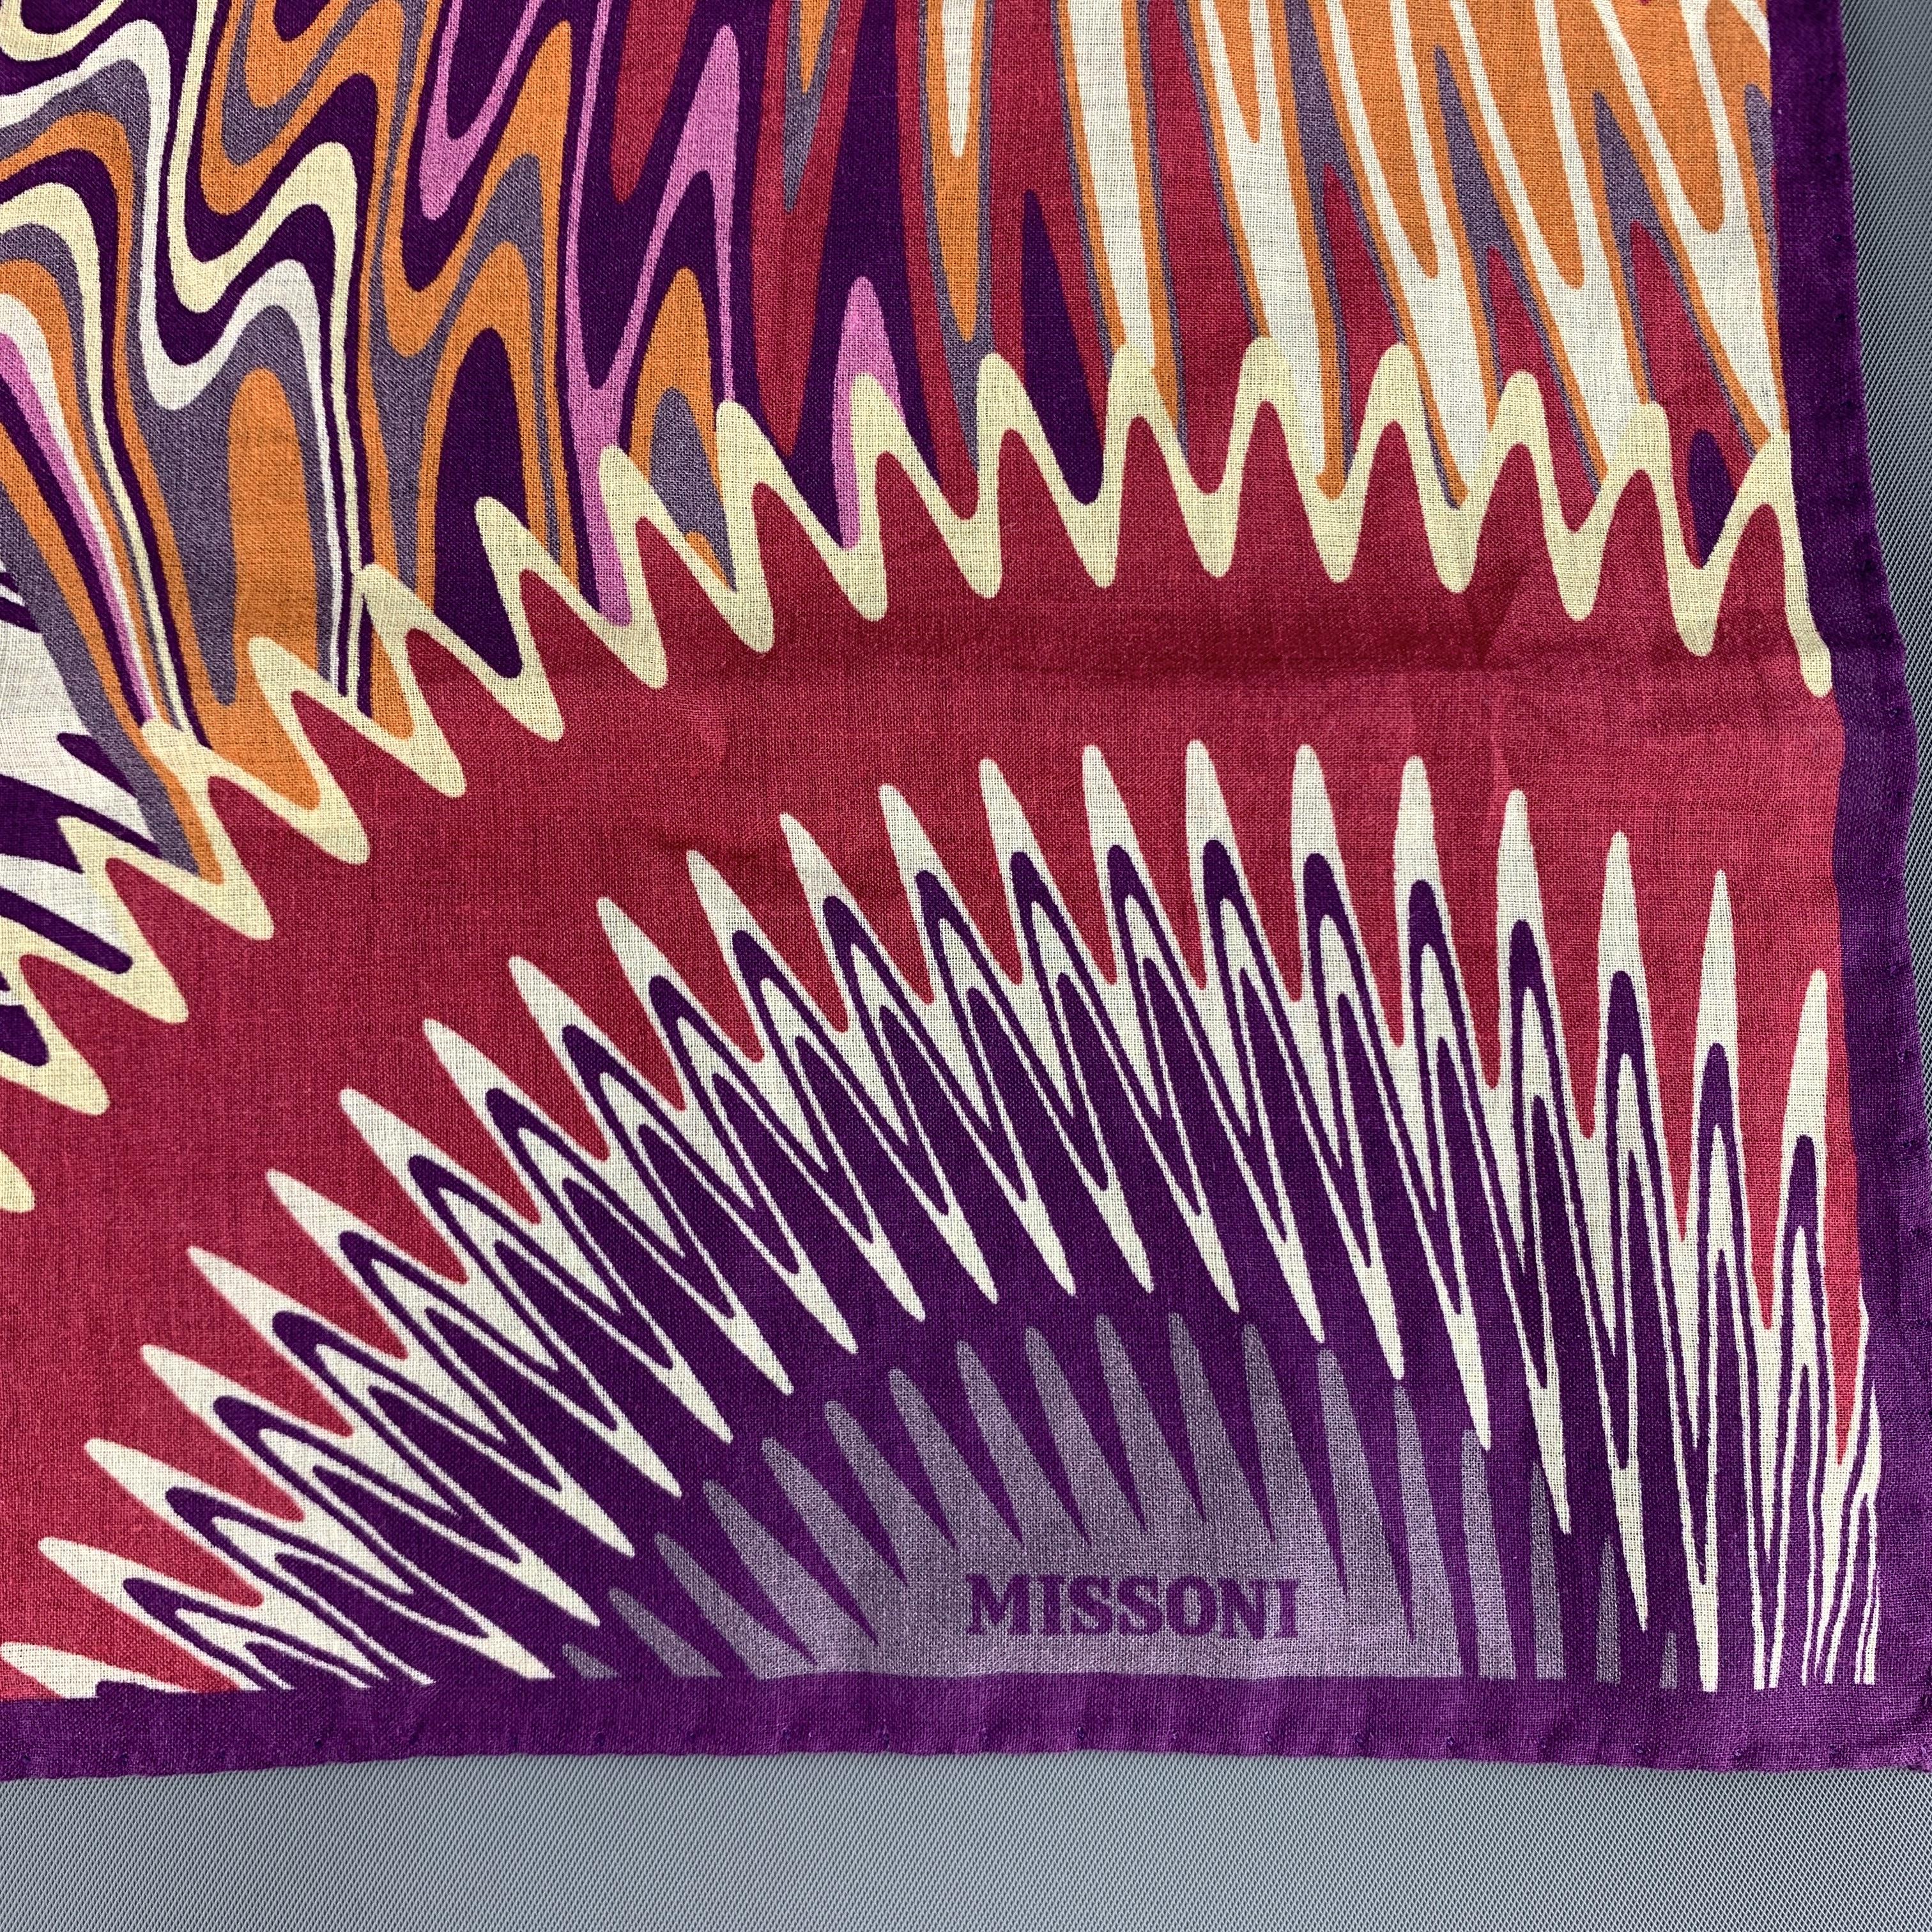 Missoni pocket square handkerchief comes in purple and beige semi sheer cotton with all over abstract pink and orange swirl print. Made in Italy.
 

Excellent Pre-Owned Condition.

16.5 x 16.5 in.